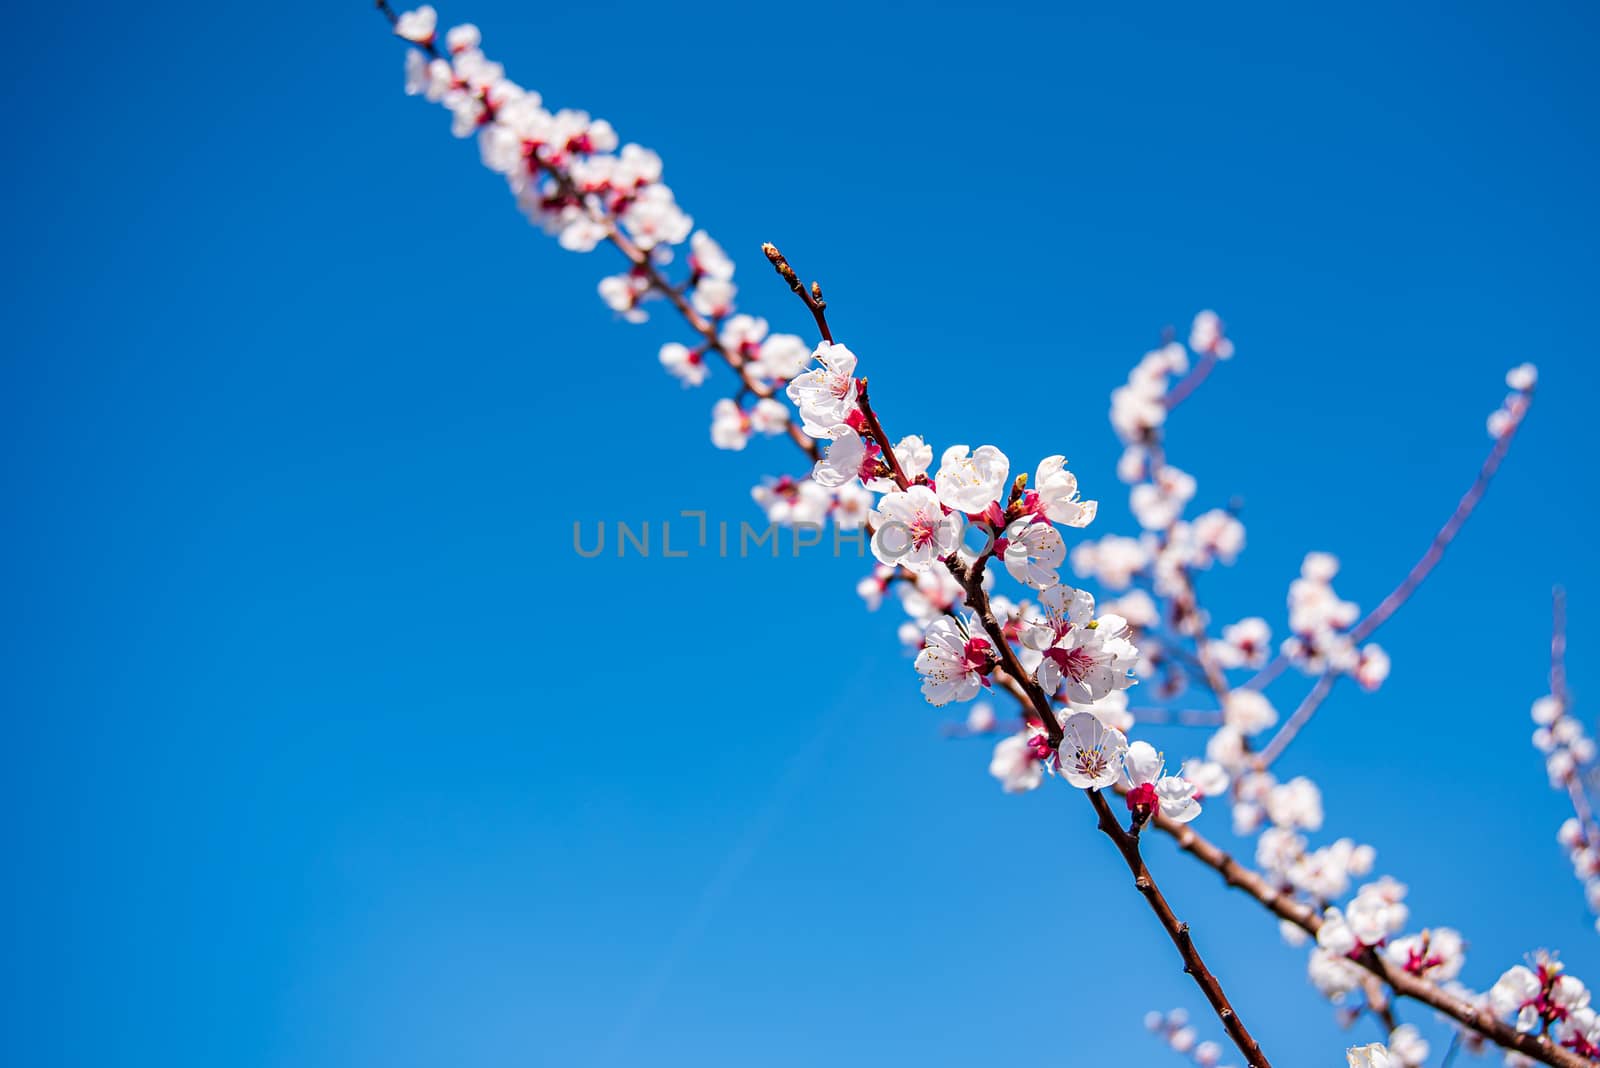 Detail view of a flowering apricot tree branch by Umtsga